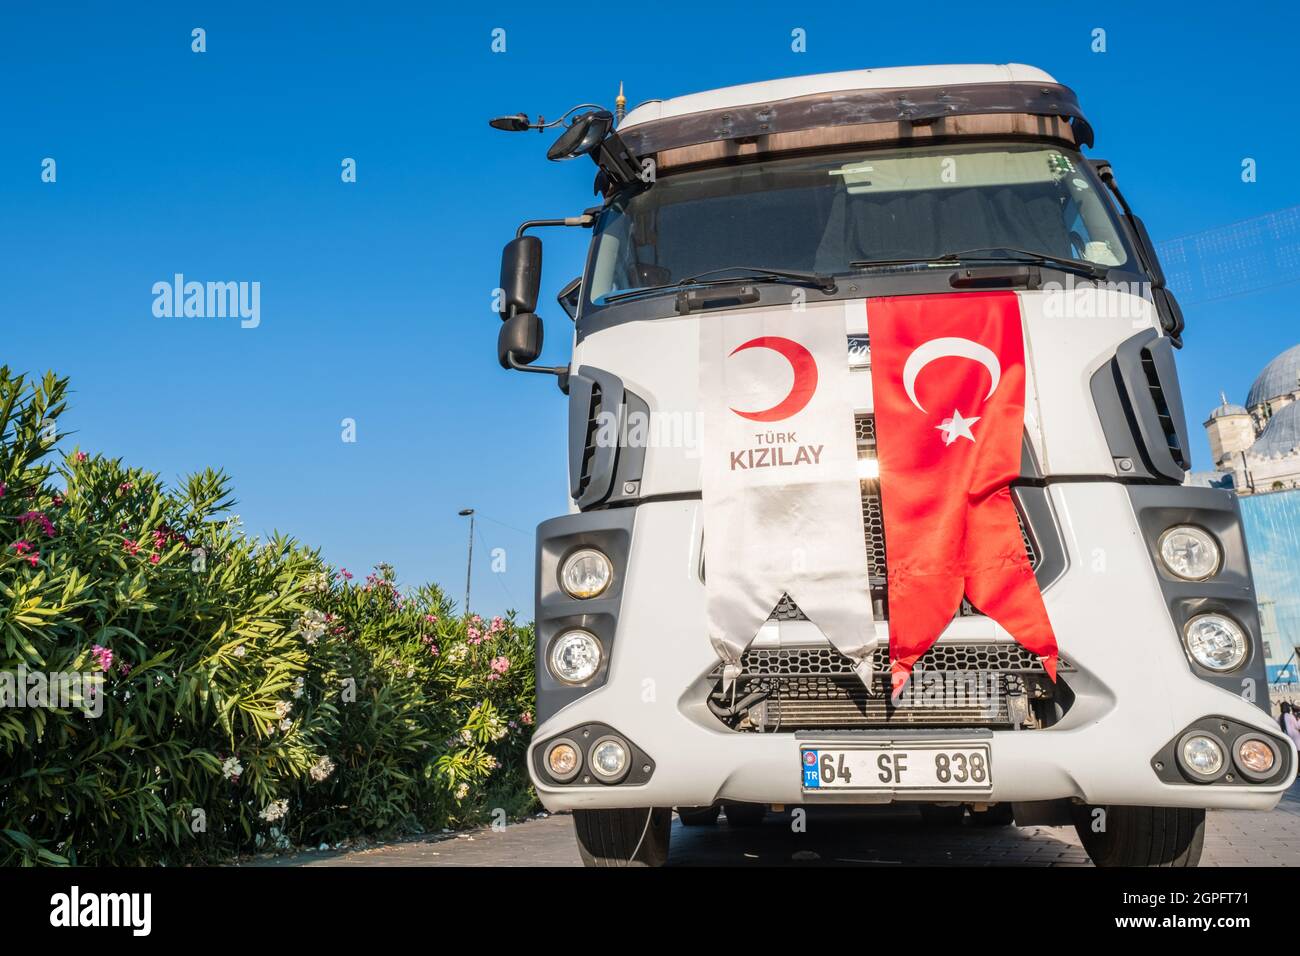 Eminonu, Istanbul, Turkey - 07.20.2021: copy space for Turkish Red Crescent (Türk Kizilay) blood donation transportation lorry with flag in square in Stock Photo